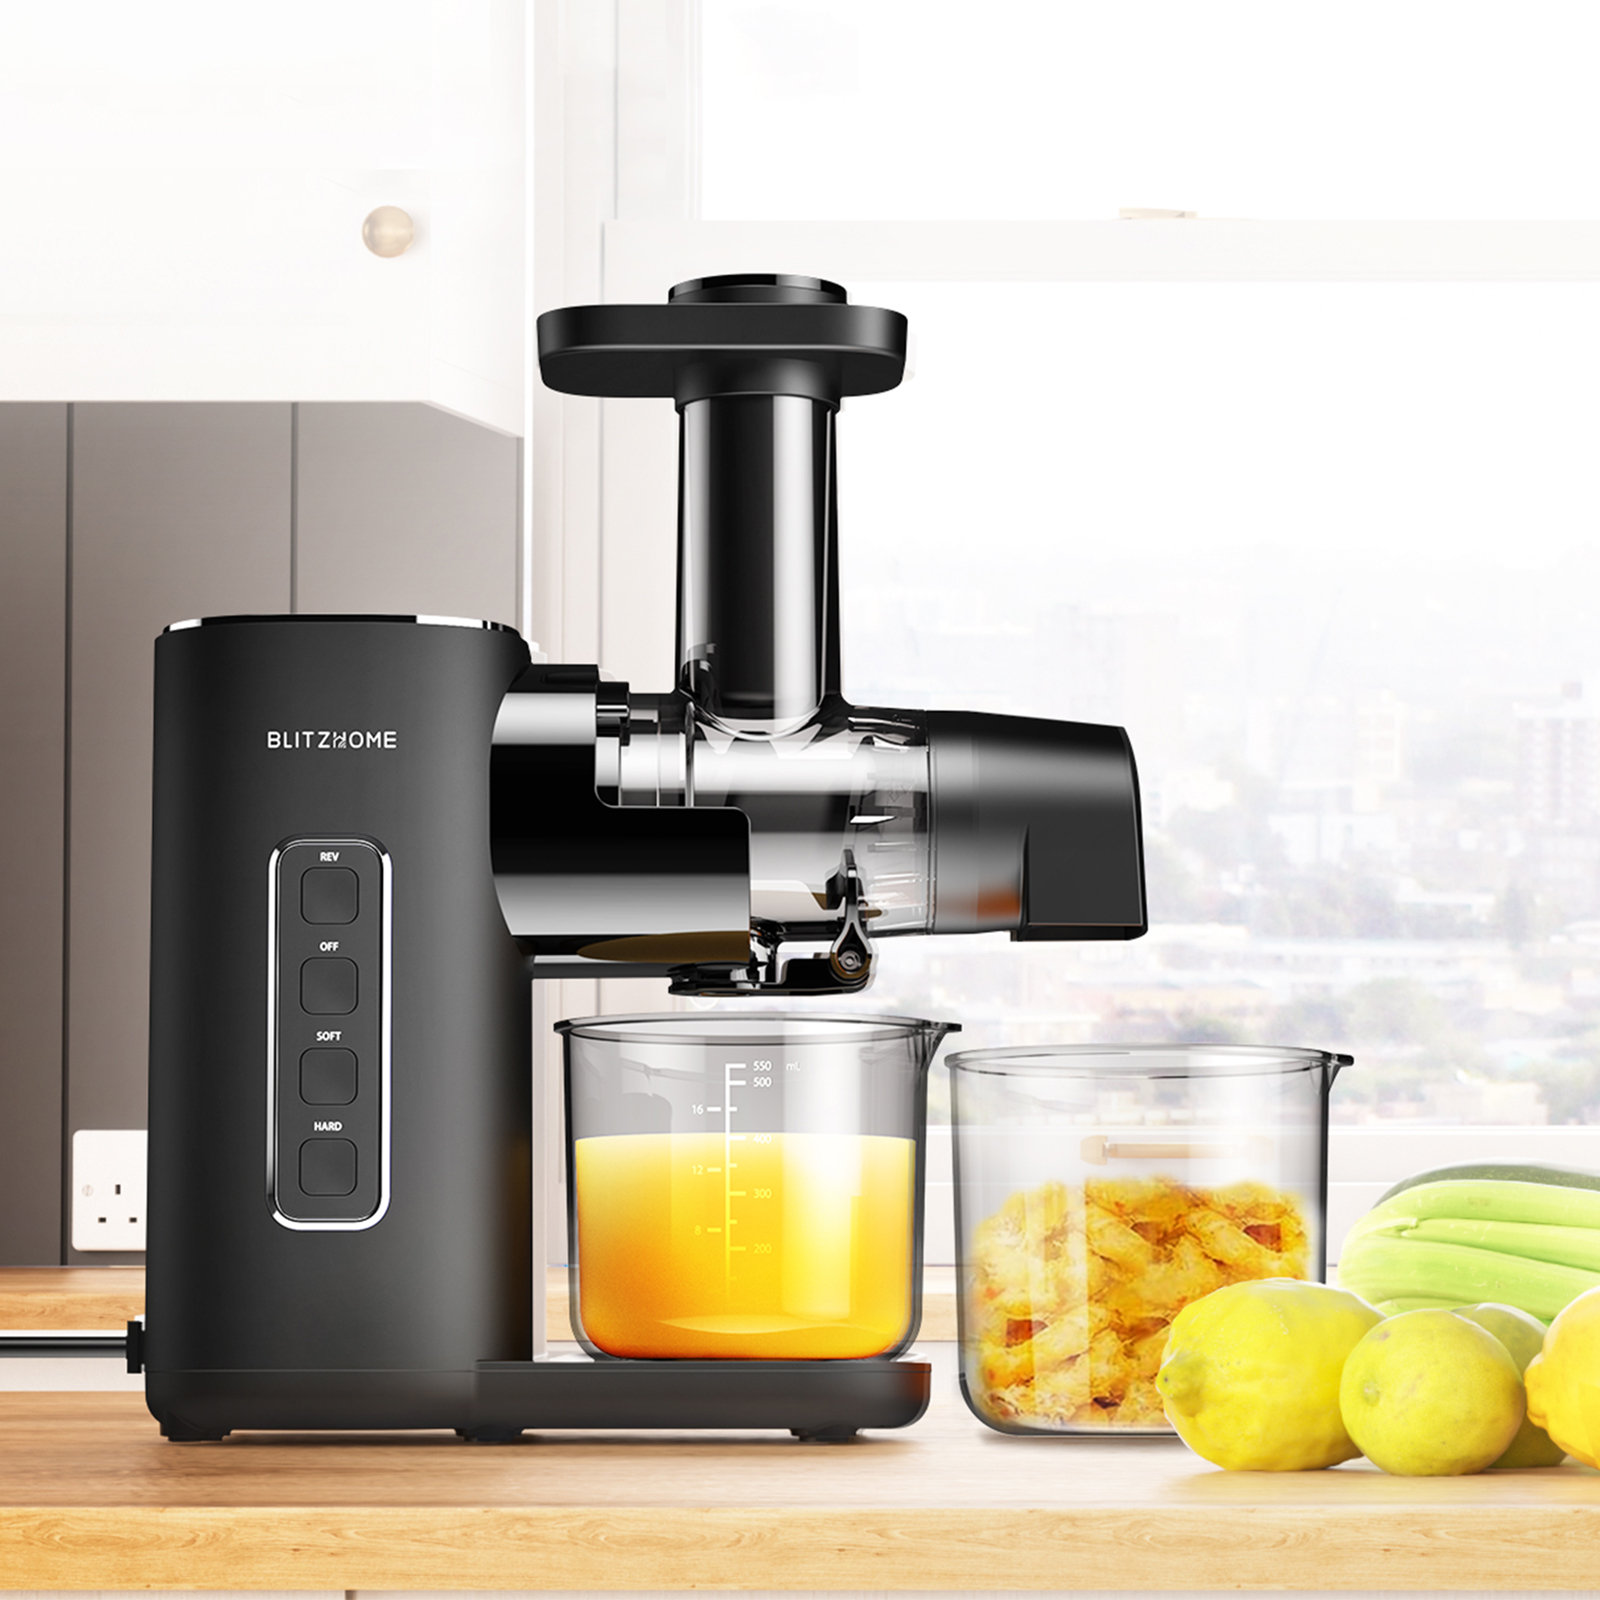 Is The Ninja Cold Press Juicer Pro A Good Juicer is a better way to juice  at home.